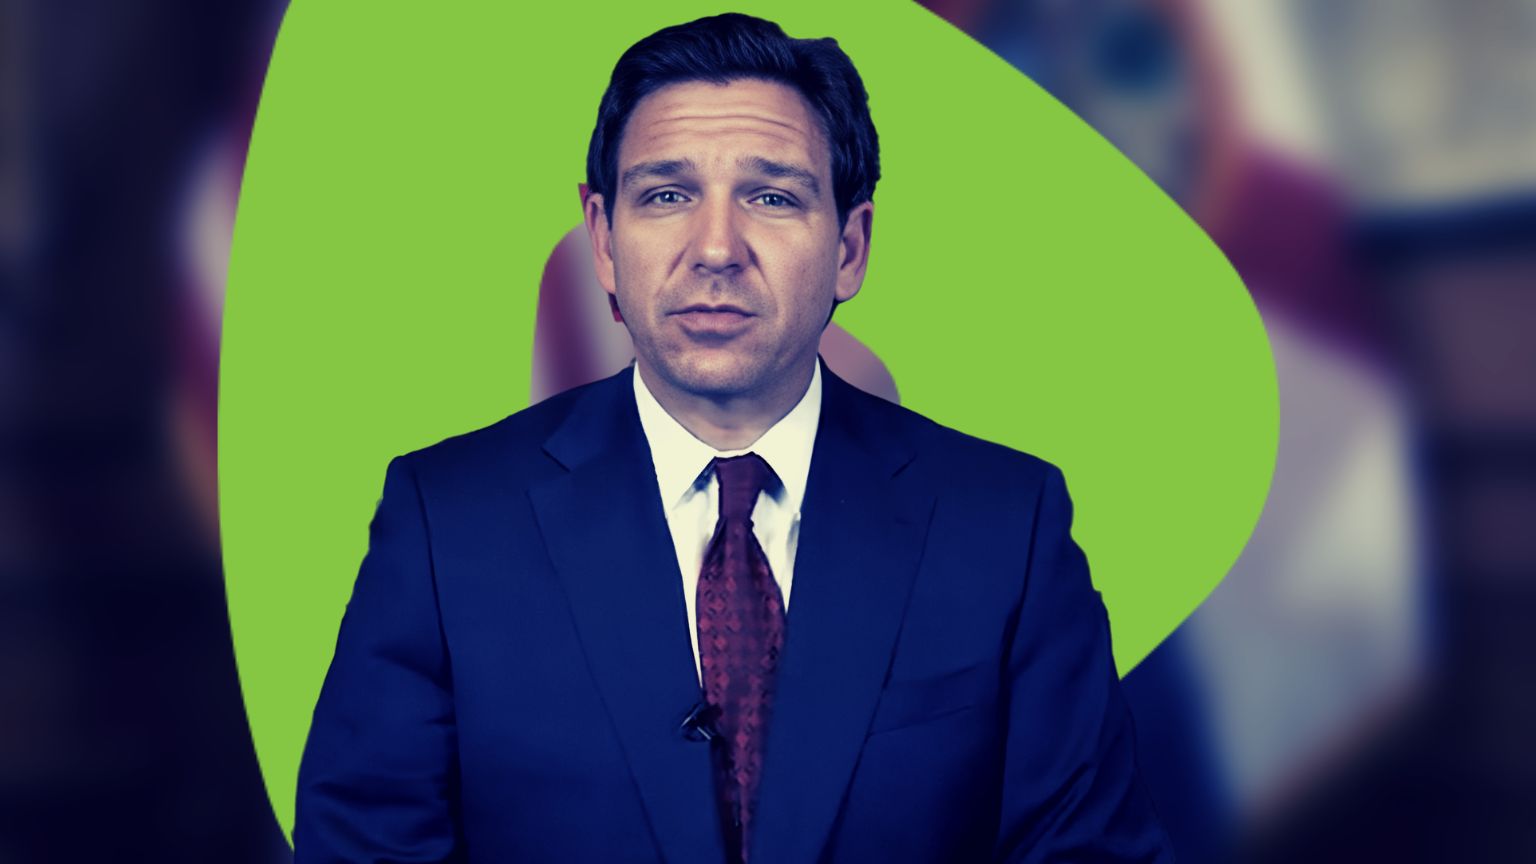 Ron DeSantis’ chooses Rumble, welcomes the company to Florida